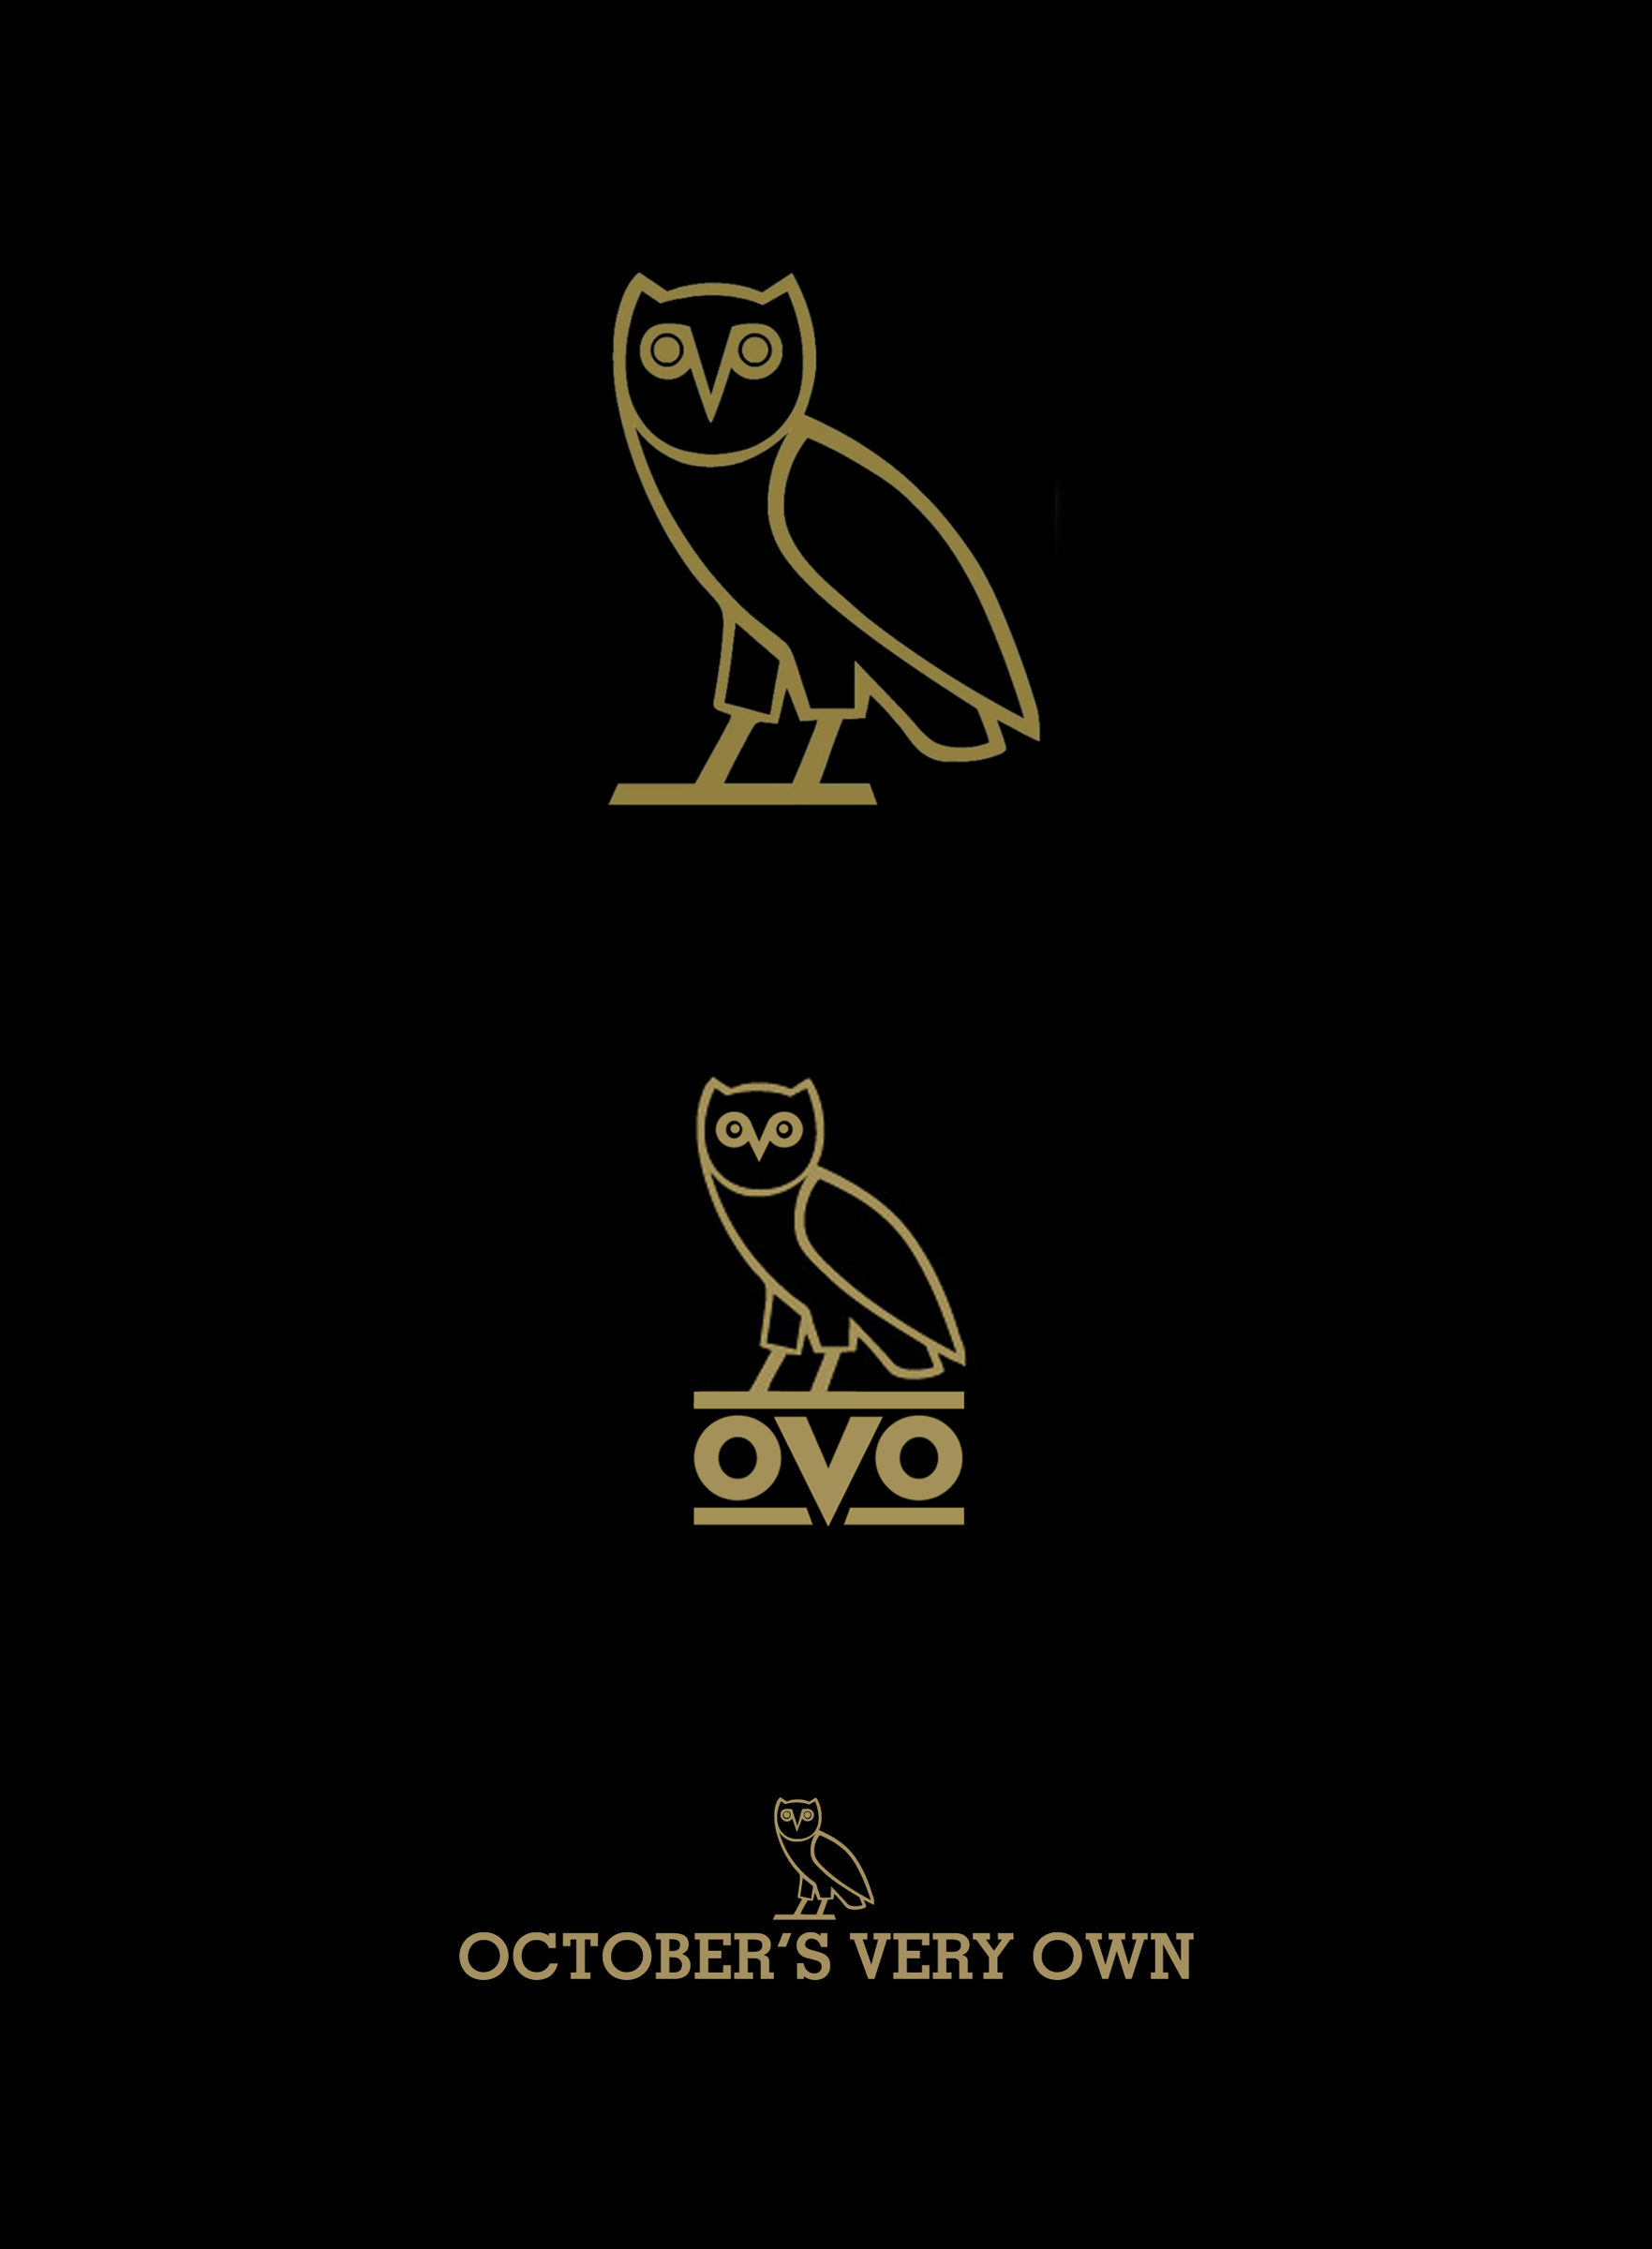 OVO logo and wordmark for Drake's made in Canada clothing line